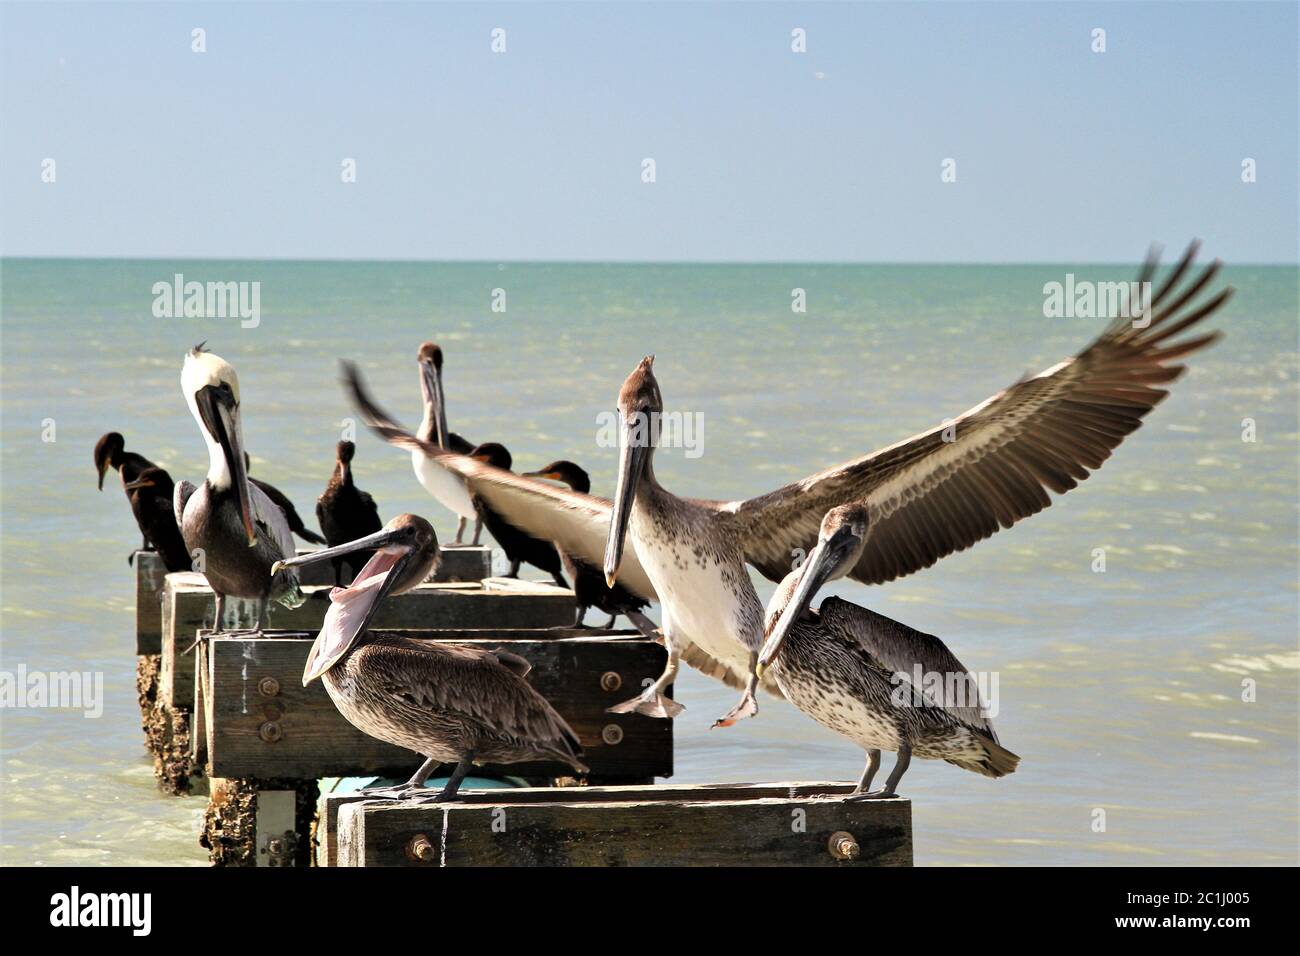 Pelicans and birds sitting on wood perches on the ocean Stock Photo